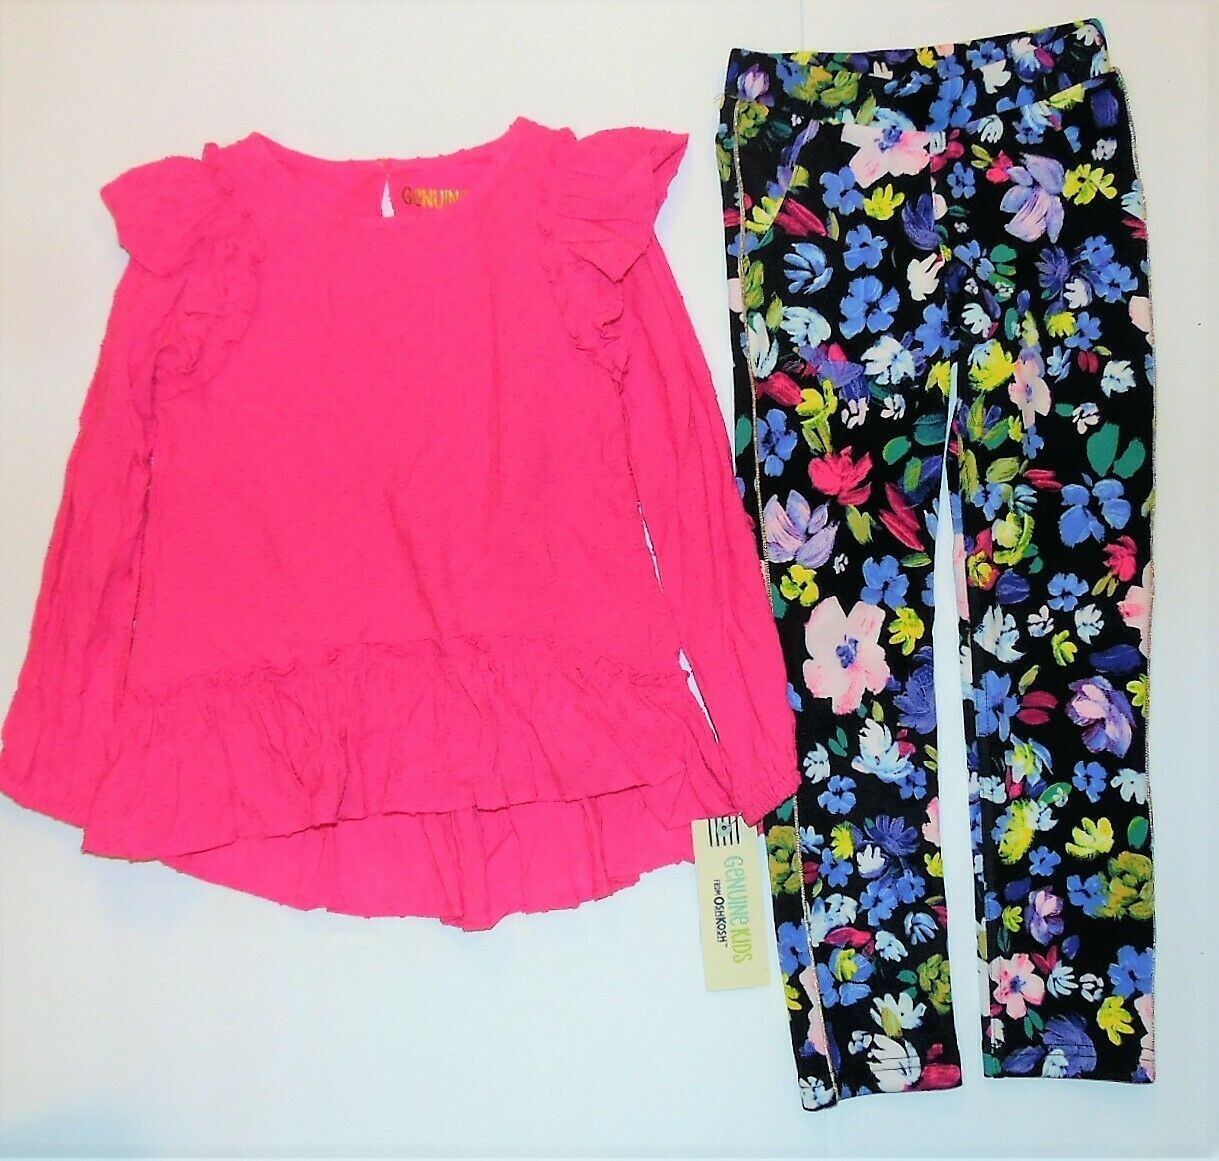 Genuine Kids From OshKosh Toddler Girls 2pc Pink Floral Outfit Size 3T NWT - $14.72